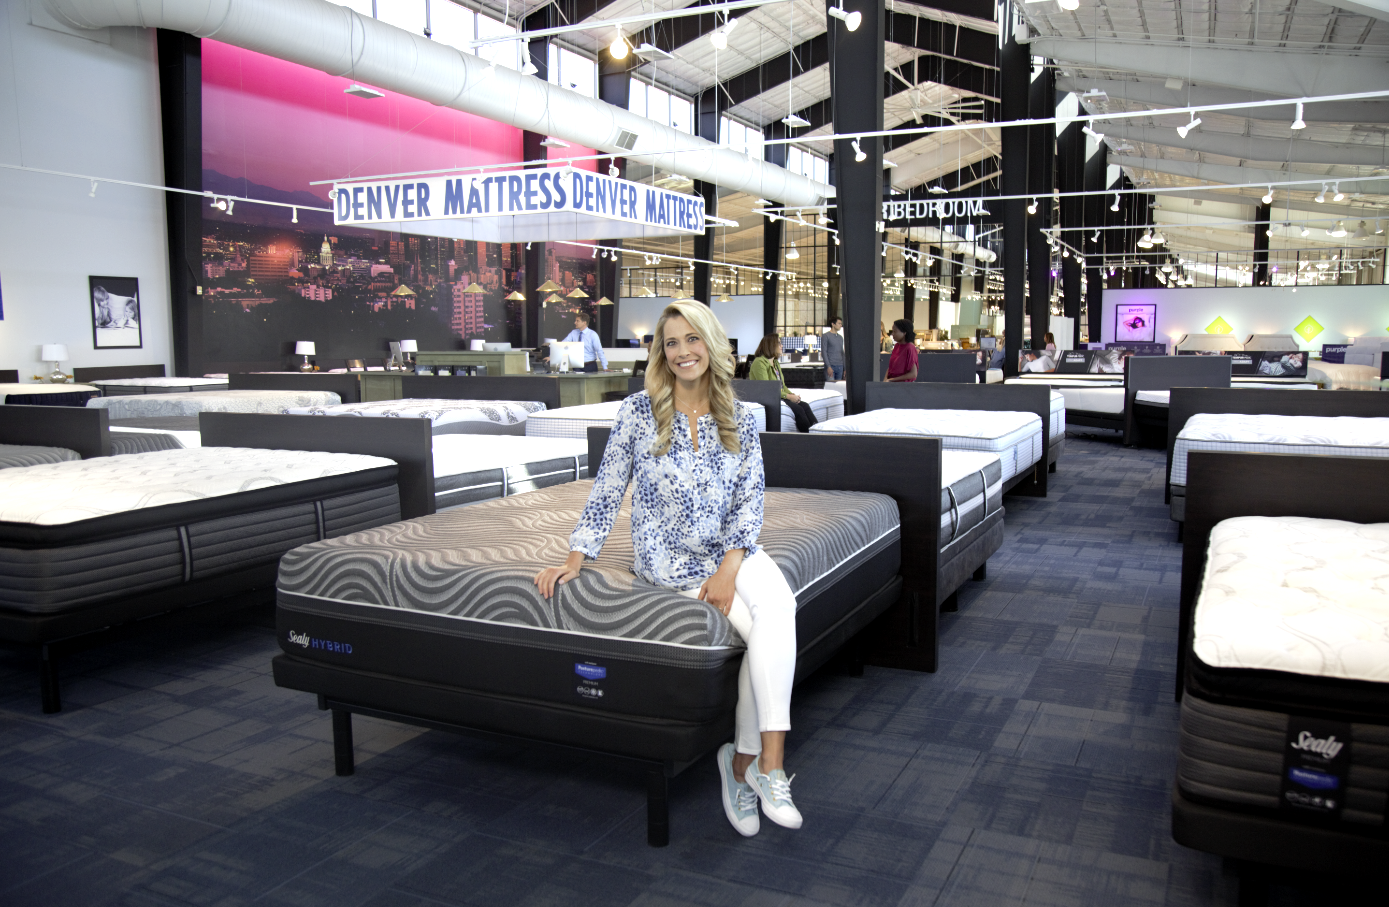 Denver Mattress - Factory Direct and Brand Name Mattresses. Huge mattress savings! Denver Mattress Johnson City (423)477-0076